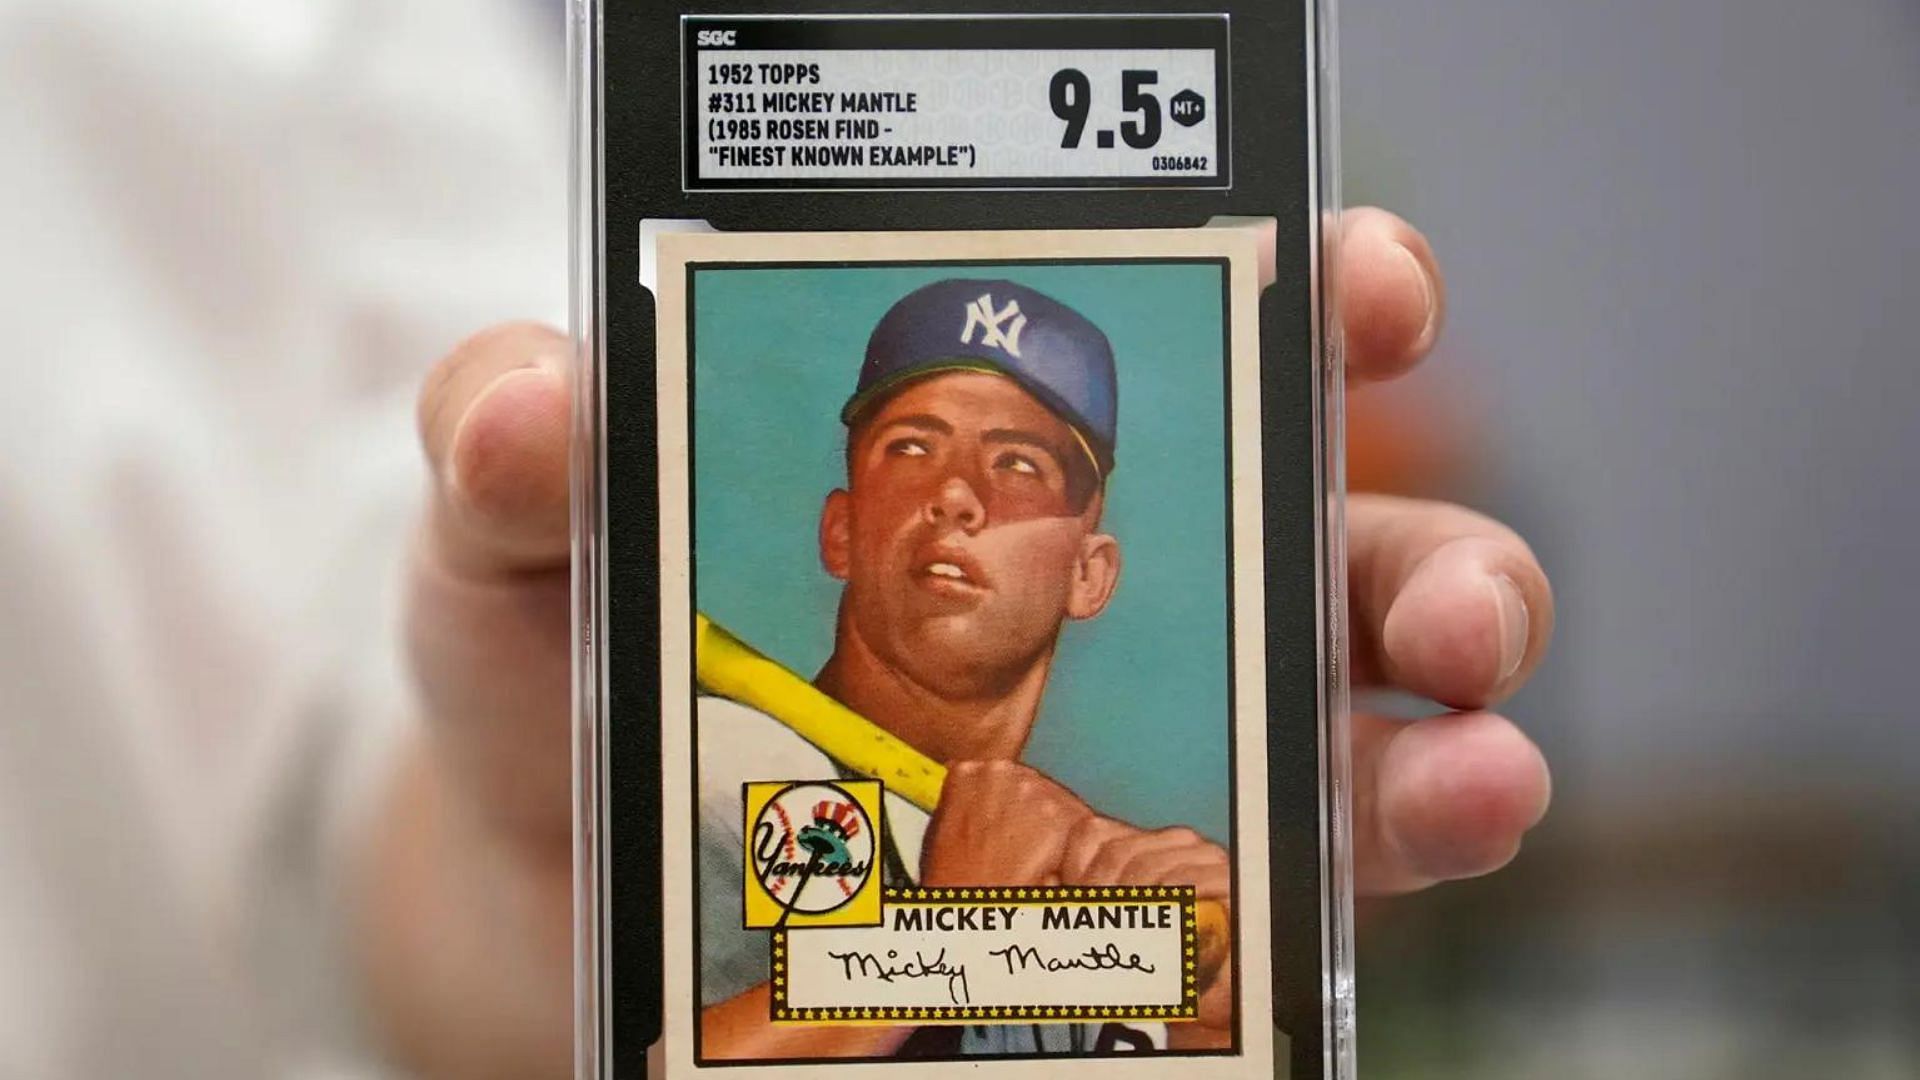 Mickey Mantle&rsquo;s baseball card has been sold.